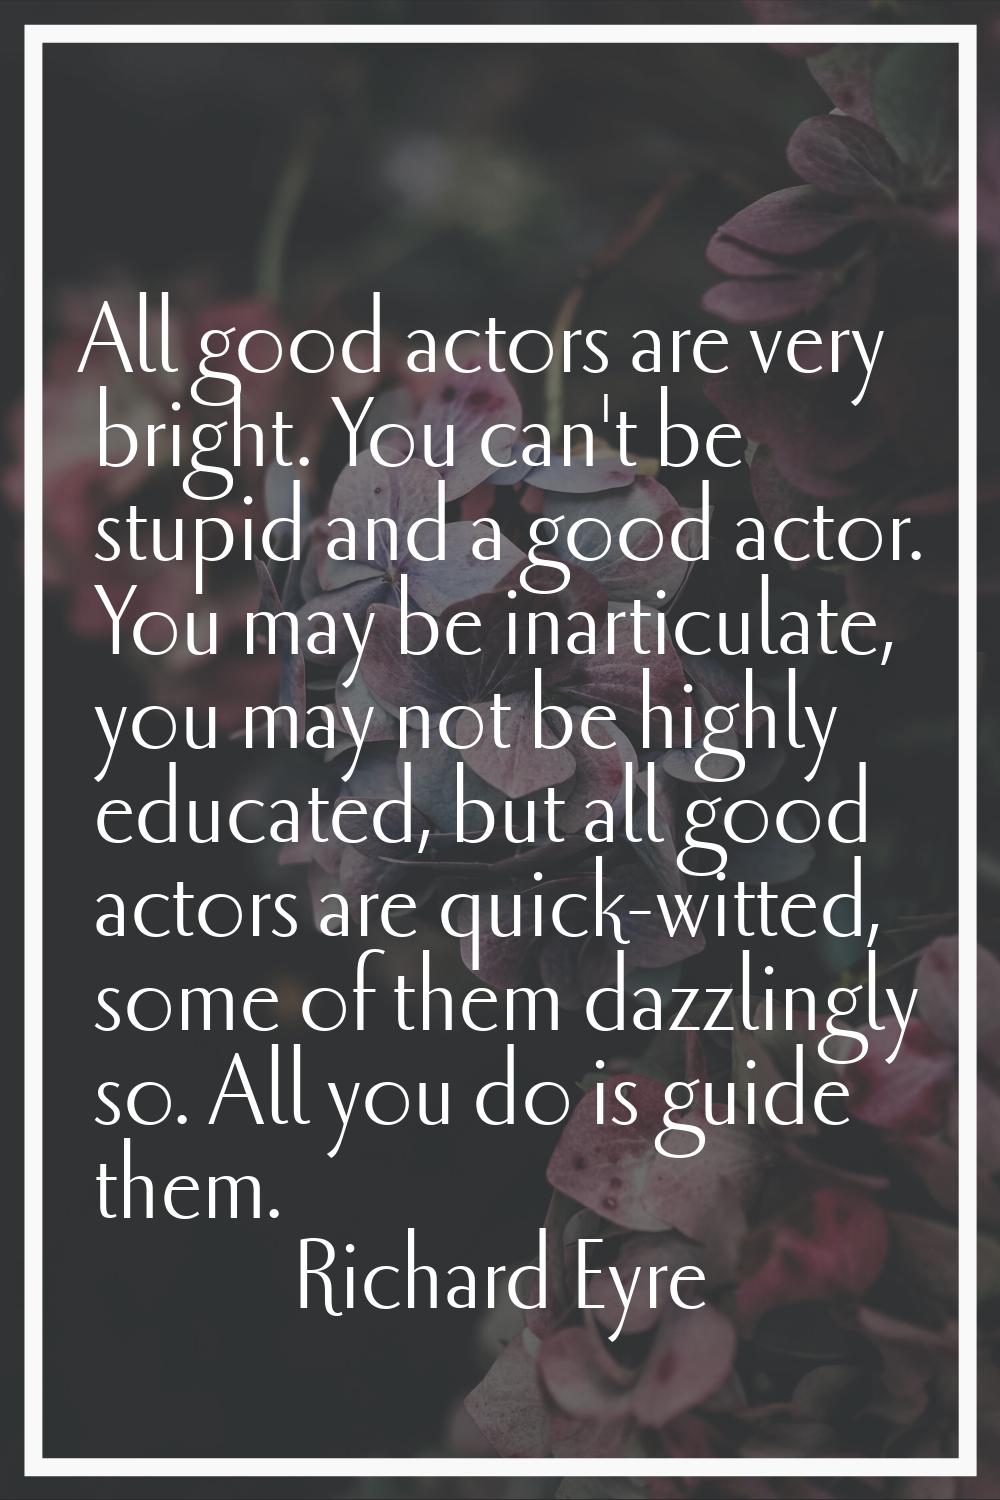 All good actors are very bright. You can't be stupid and a good actor. You may be inarticulate, you